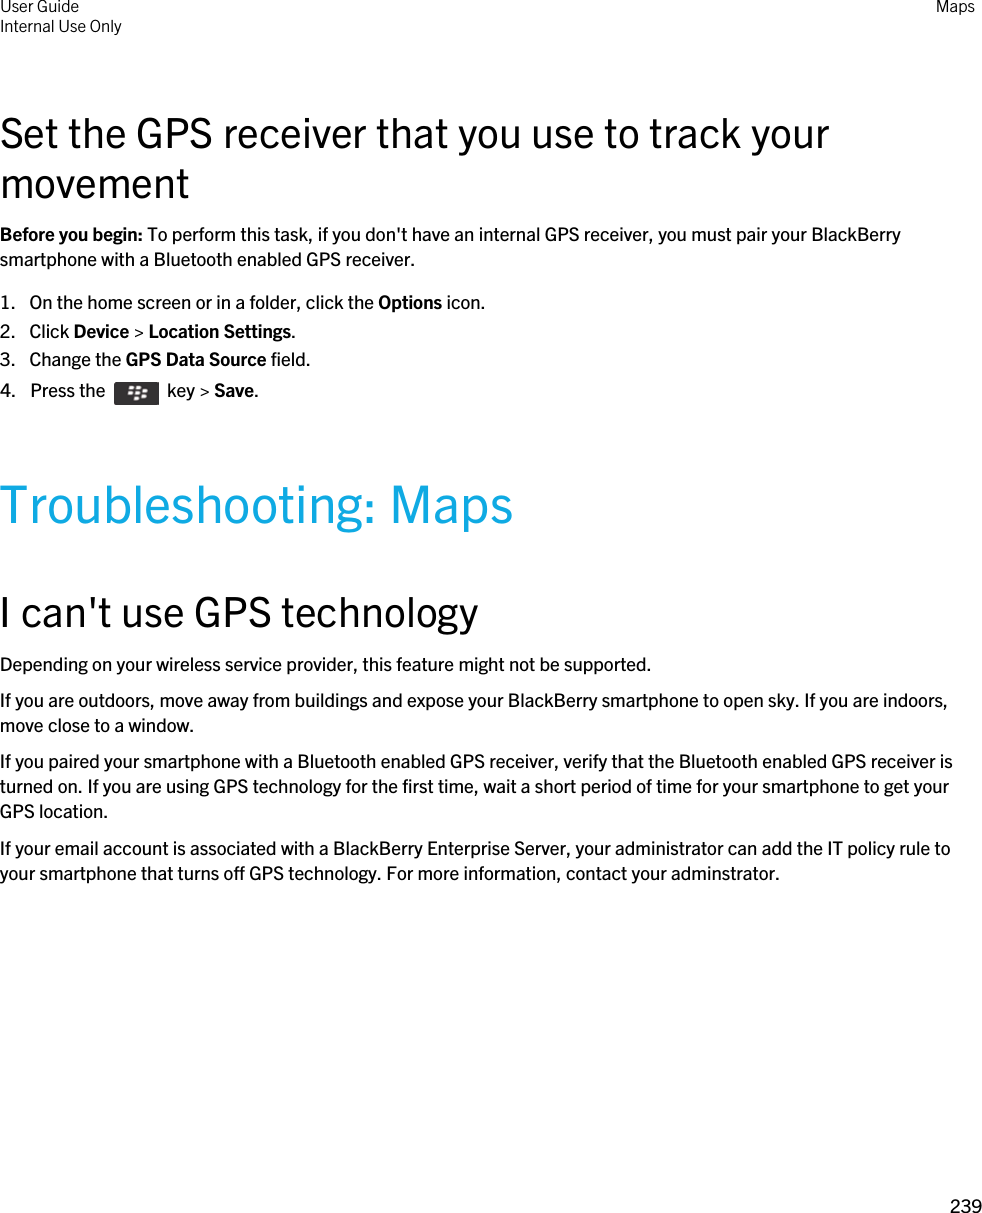 Set the GPS receiver that you use to track your movementBefore you begin: To perform this task, if you don&apos;t have an internal GPS receiver, you must pair your BlackBerry smartphone with a Bluetooth enabled GPS receiver.1. On the home screen or in a folder, click the Options icon.2. Click Device &gt; Location Settings.3. Change the GPS Data Source field.4.  Press the    key &gt; Save. Troubleshooting: MapsI can&apos;t use GPS technologyDepending on your wireless service provider, this feature might not be supported. If you are outdoors, move away from buildings and expose your BlackBerry smartphone to open sky. If you are indoors, move close to a window.If you paired your smartphone with a Bluetooth enabled GPS receiver, verify that the Bluetooth enabled GPS receiver is turned on. If you are using GPS technology for the first time, wait a short period of time for your smartphone to get your GPS location.If your email account is associated with a BlackBerry Enterprise Server, your administrator can add the IT policy rule to your smartphone that turns off GPS technology. For more information, contact your adminstrator.User GuideInternal Use Only Maps239 